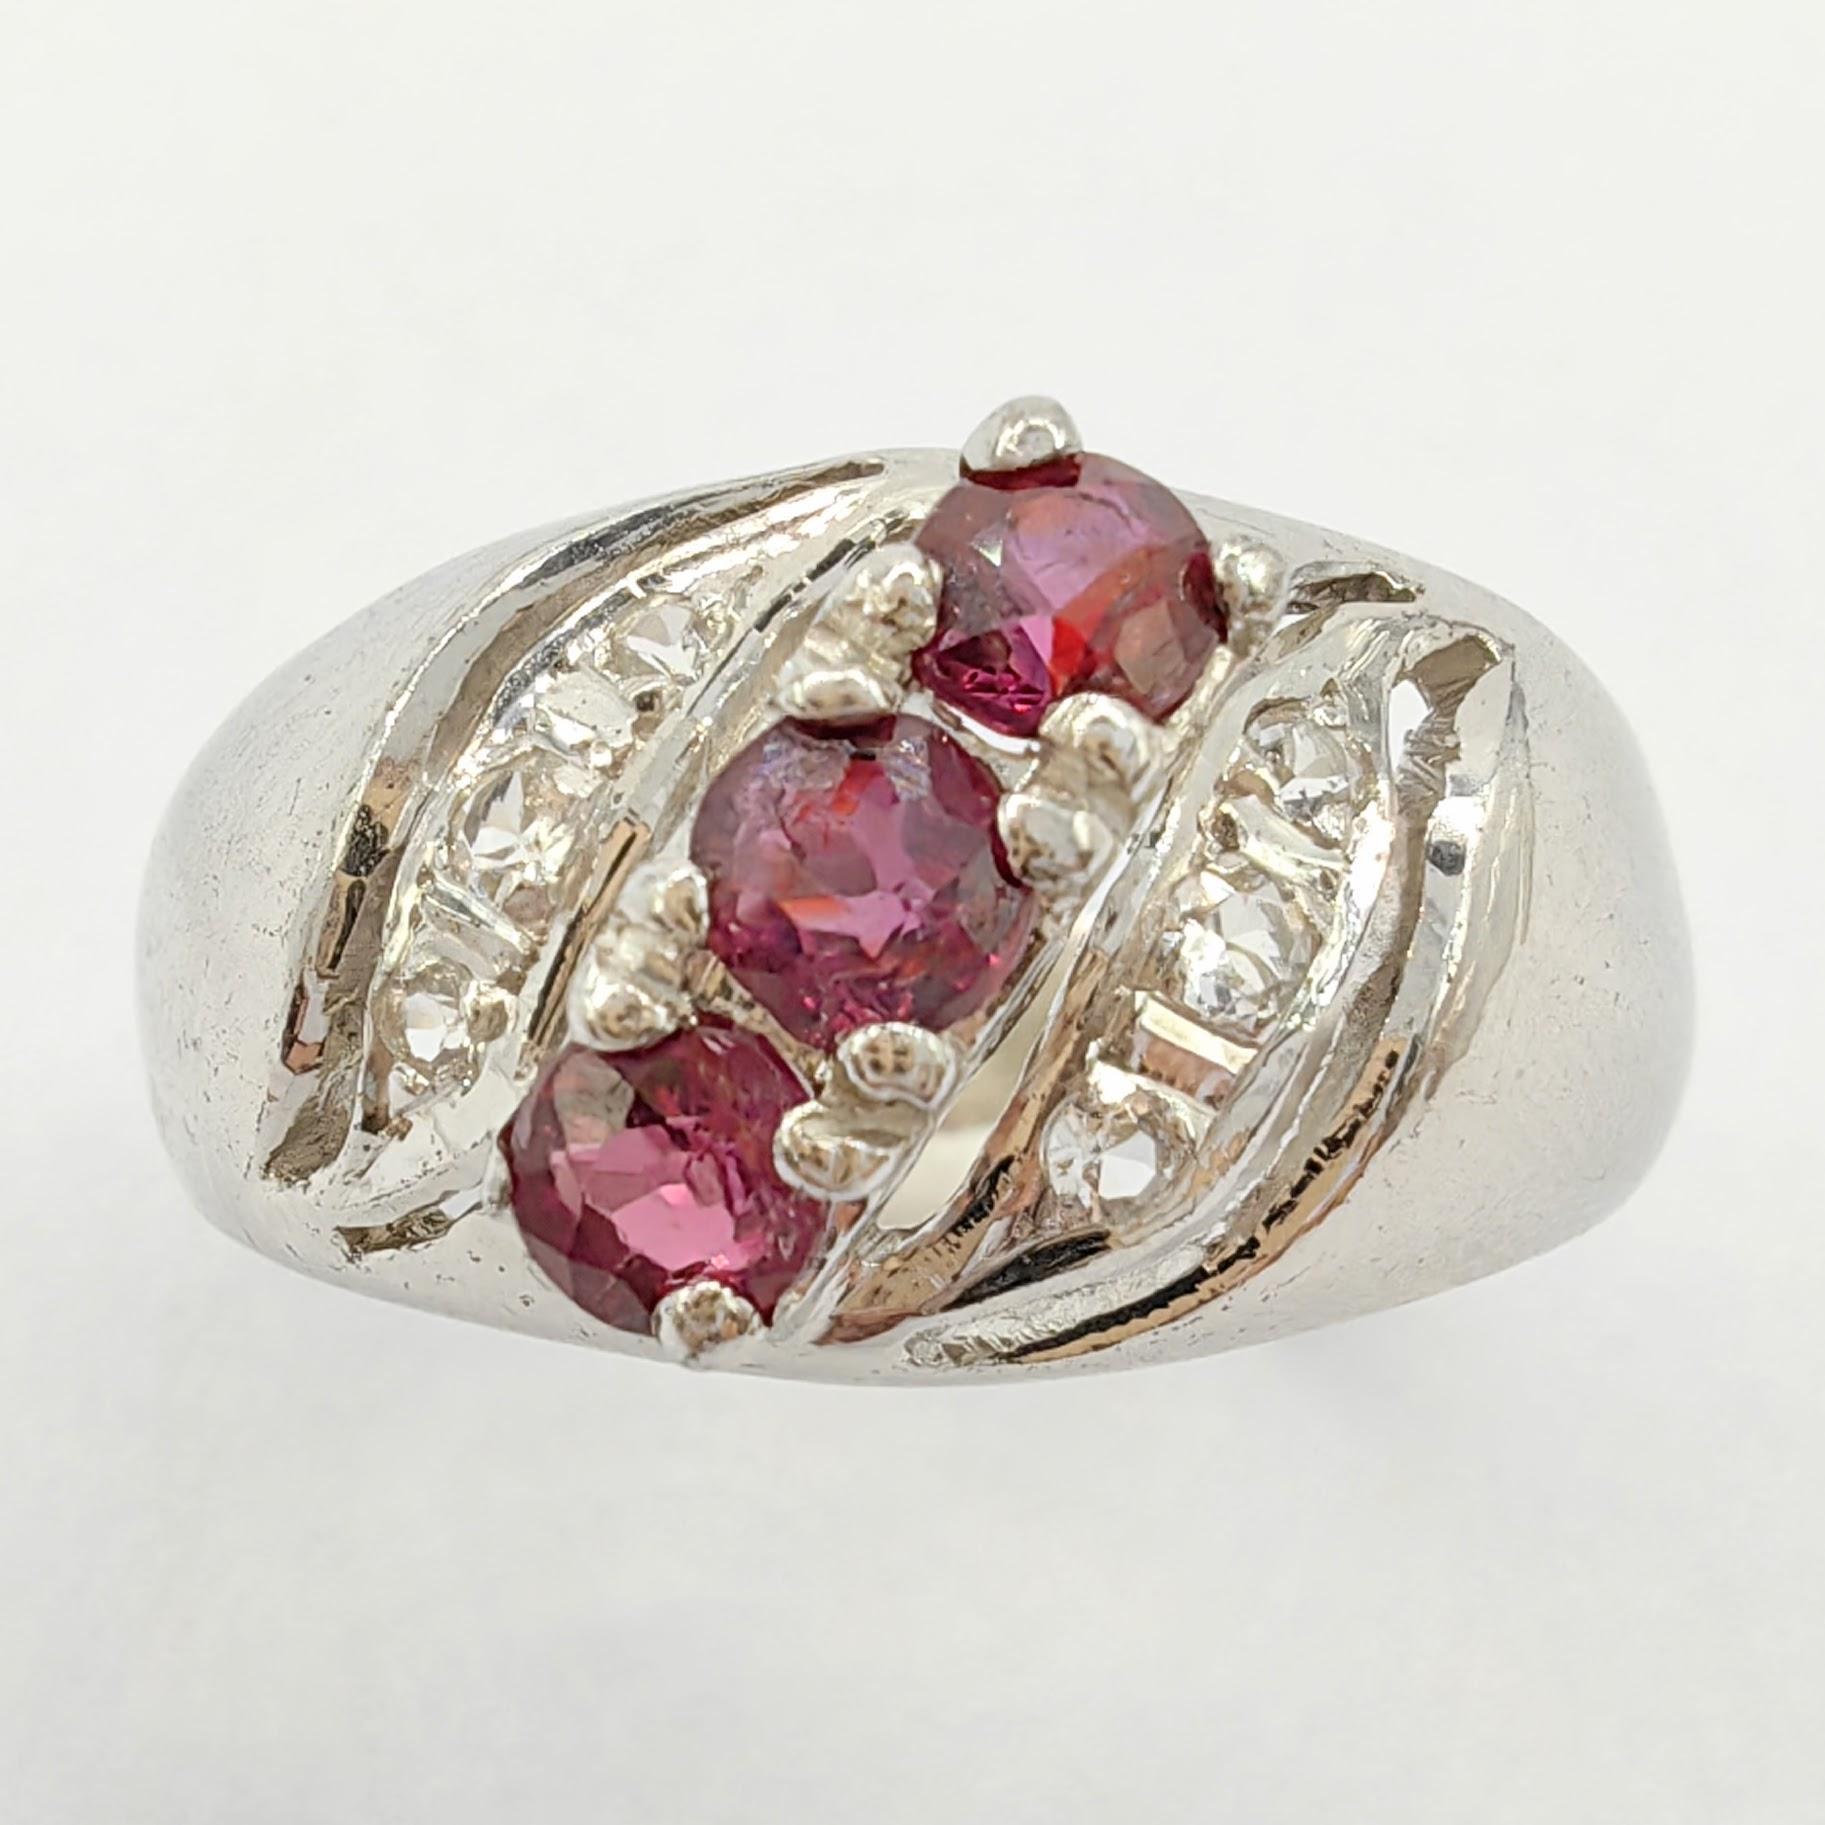 Introducing our exquisite Vintage Ruby Diamond Ring in 925 Sterling Silver, a timeless piece that effortlessly combines the captivating allure of rubies and diamonds with the elegance of sterling silver. This enchanting ring features a delicate